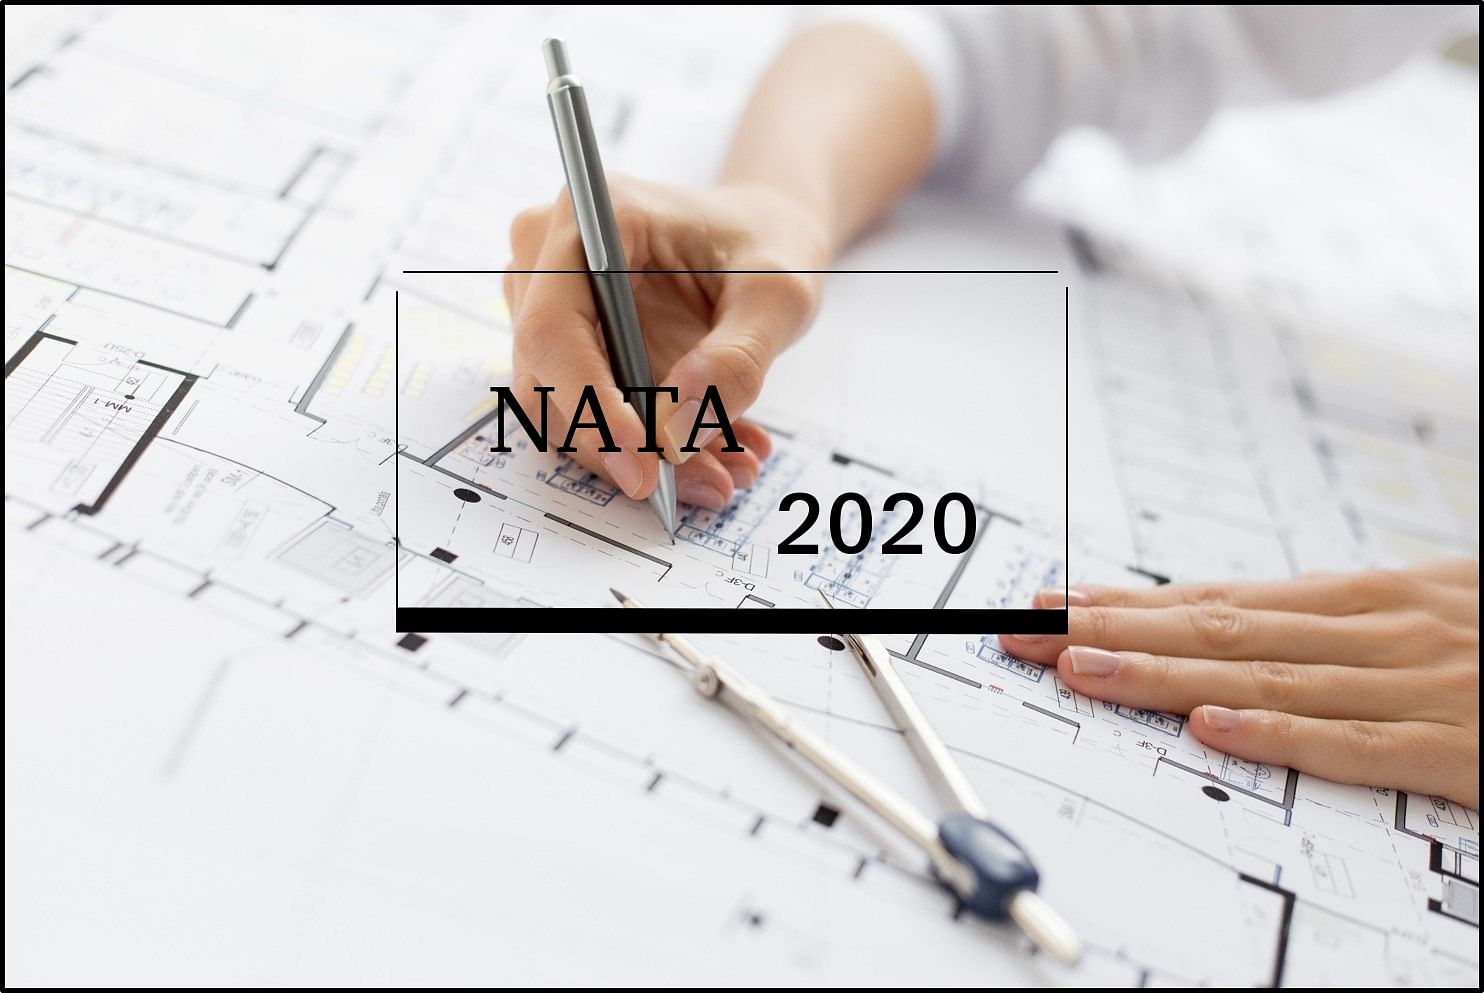 NATA 2020: Application Form Last Date Extended Again, Check New Dates